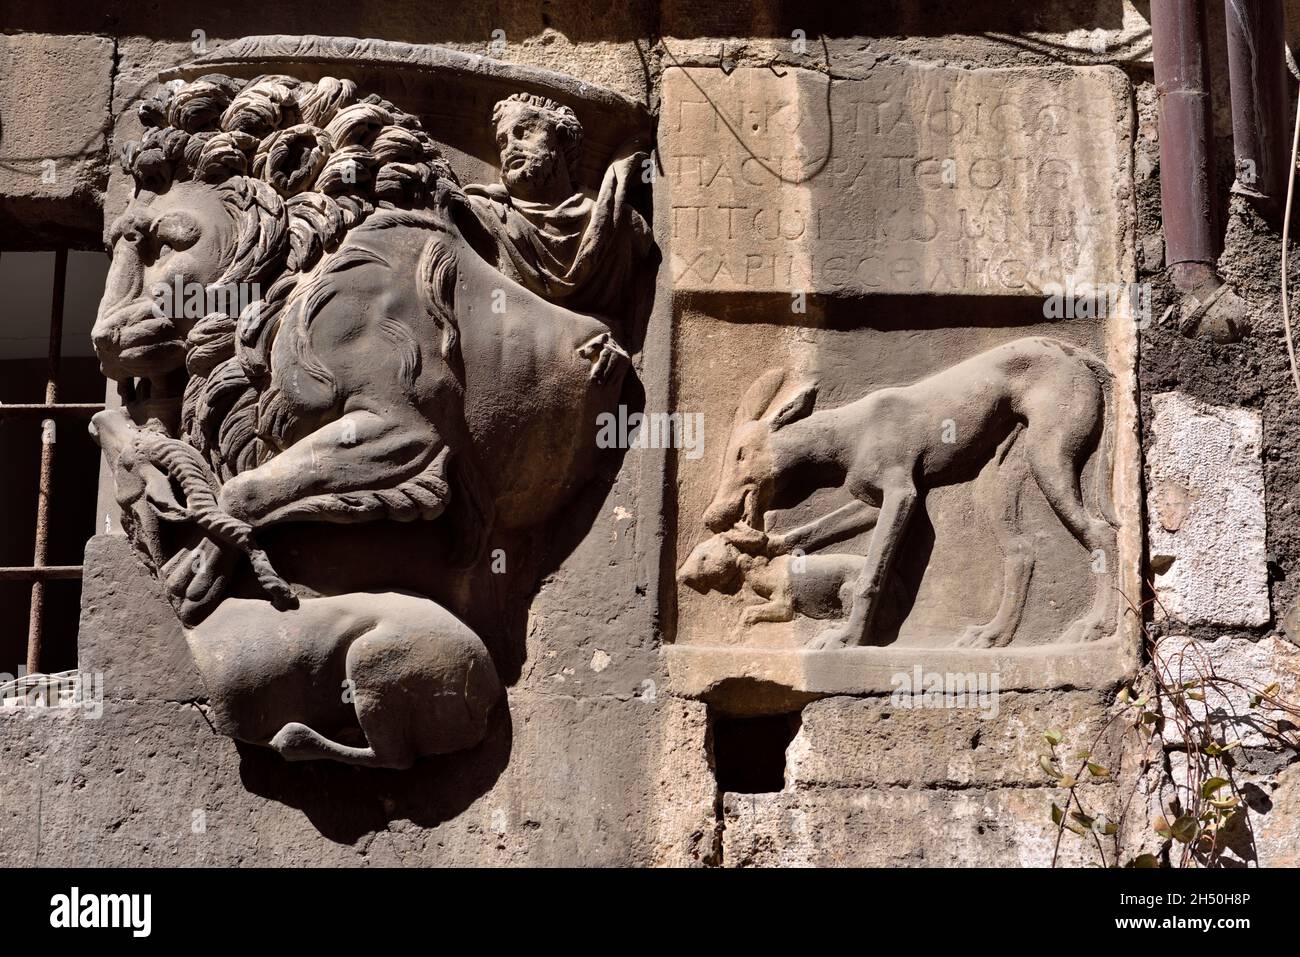 italy, rome, jewish ghetto, via del portico d'ottavia, casa di lorenzo manili, fragment of roman sarcophagus with lion and bas relief with deer Stock Photo